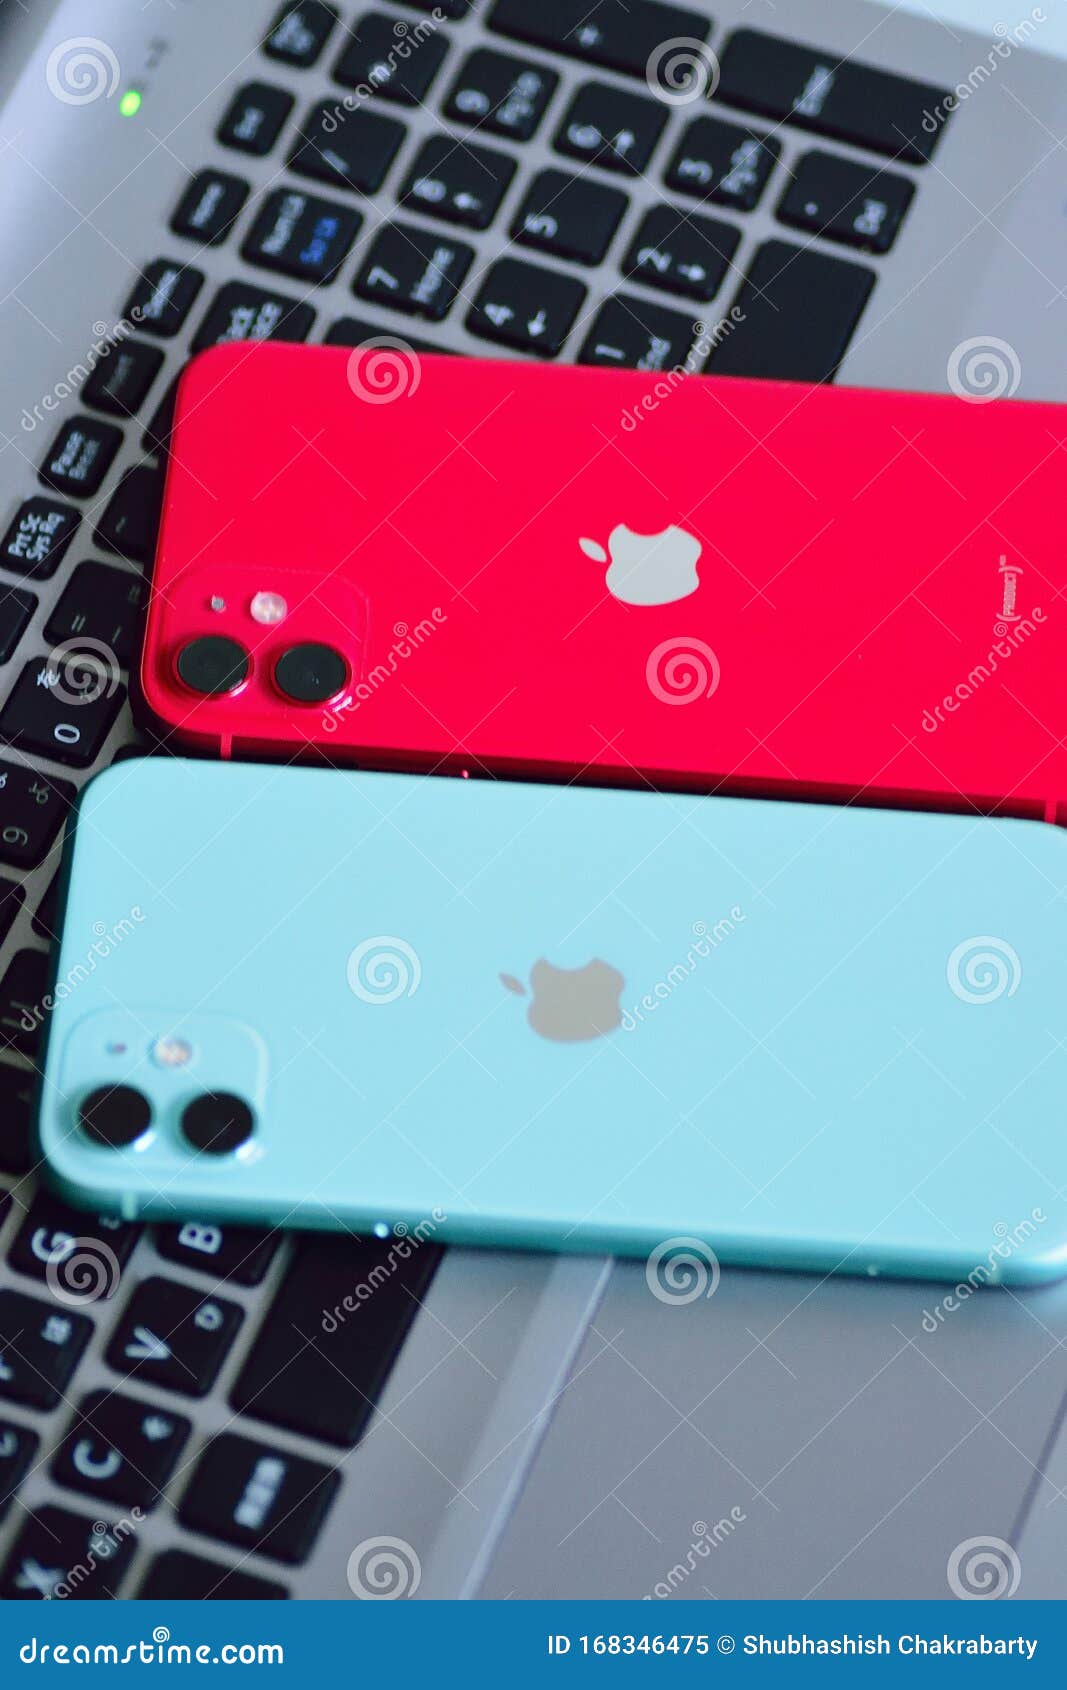 Red Mint Green Color Iphone 11 Featuring Dual Camera Editorial Image Image Of Background Electronics